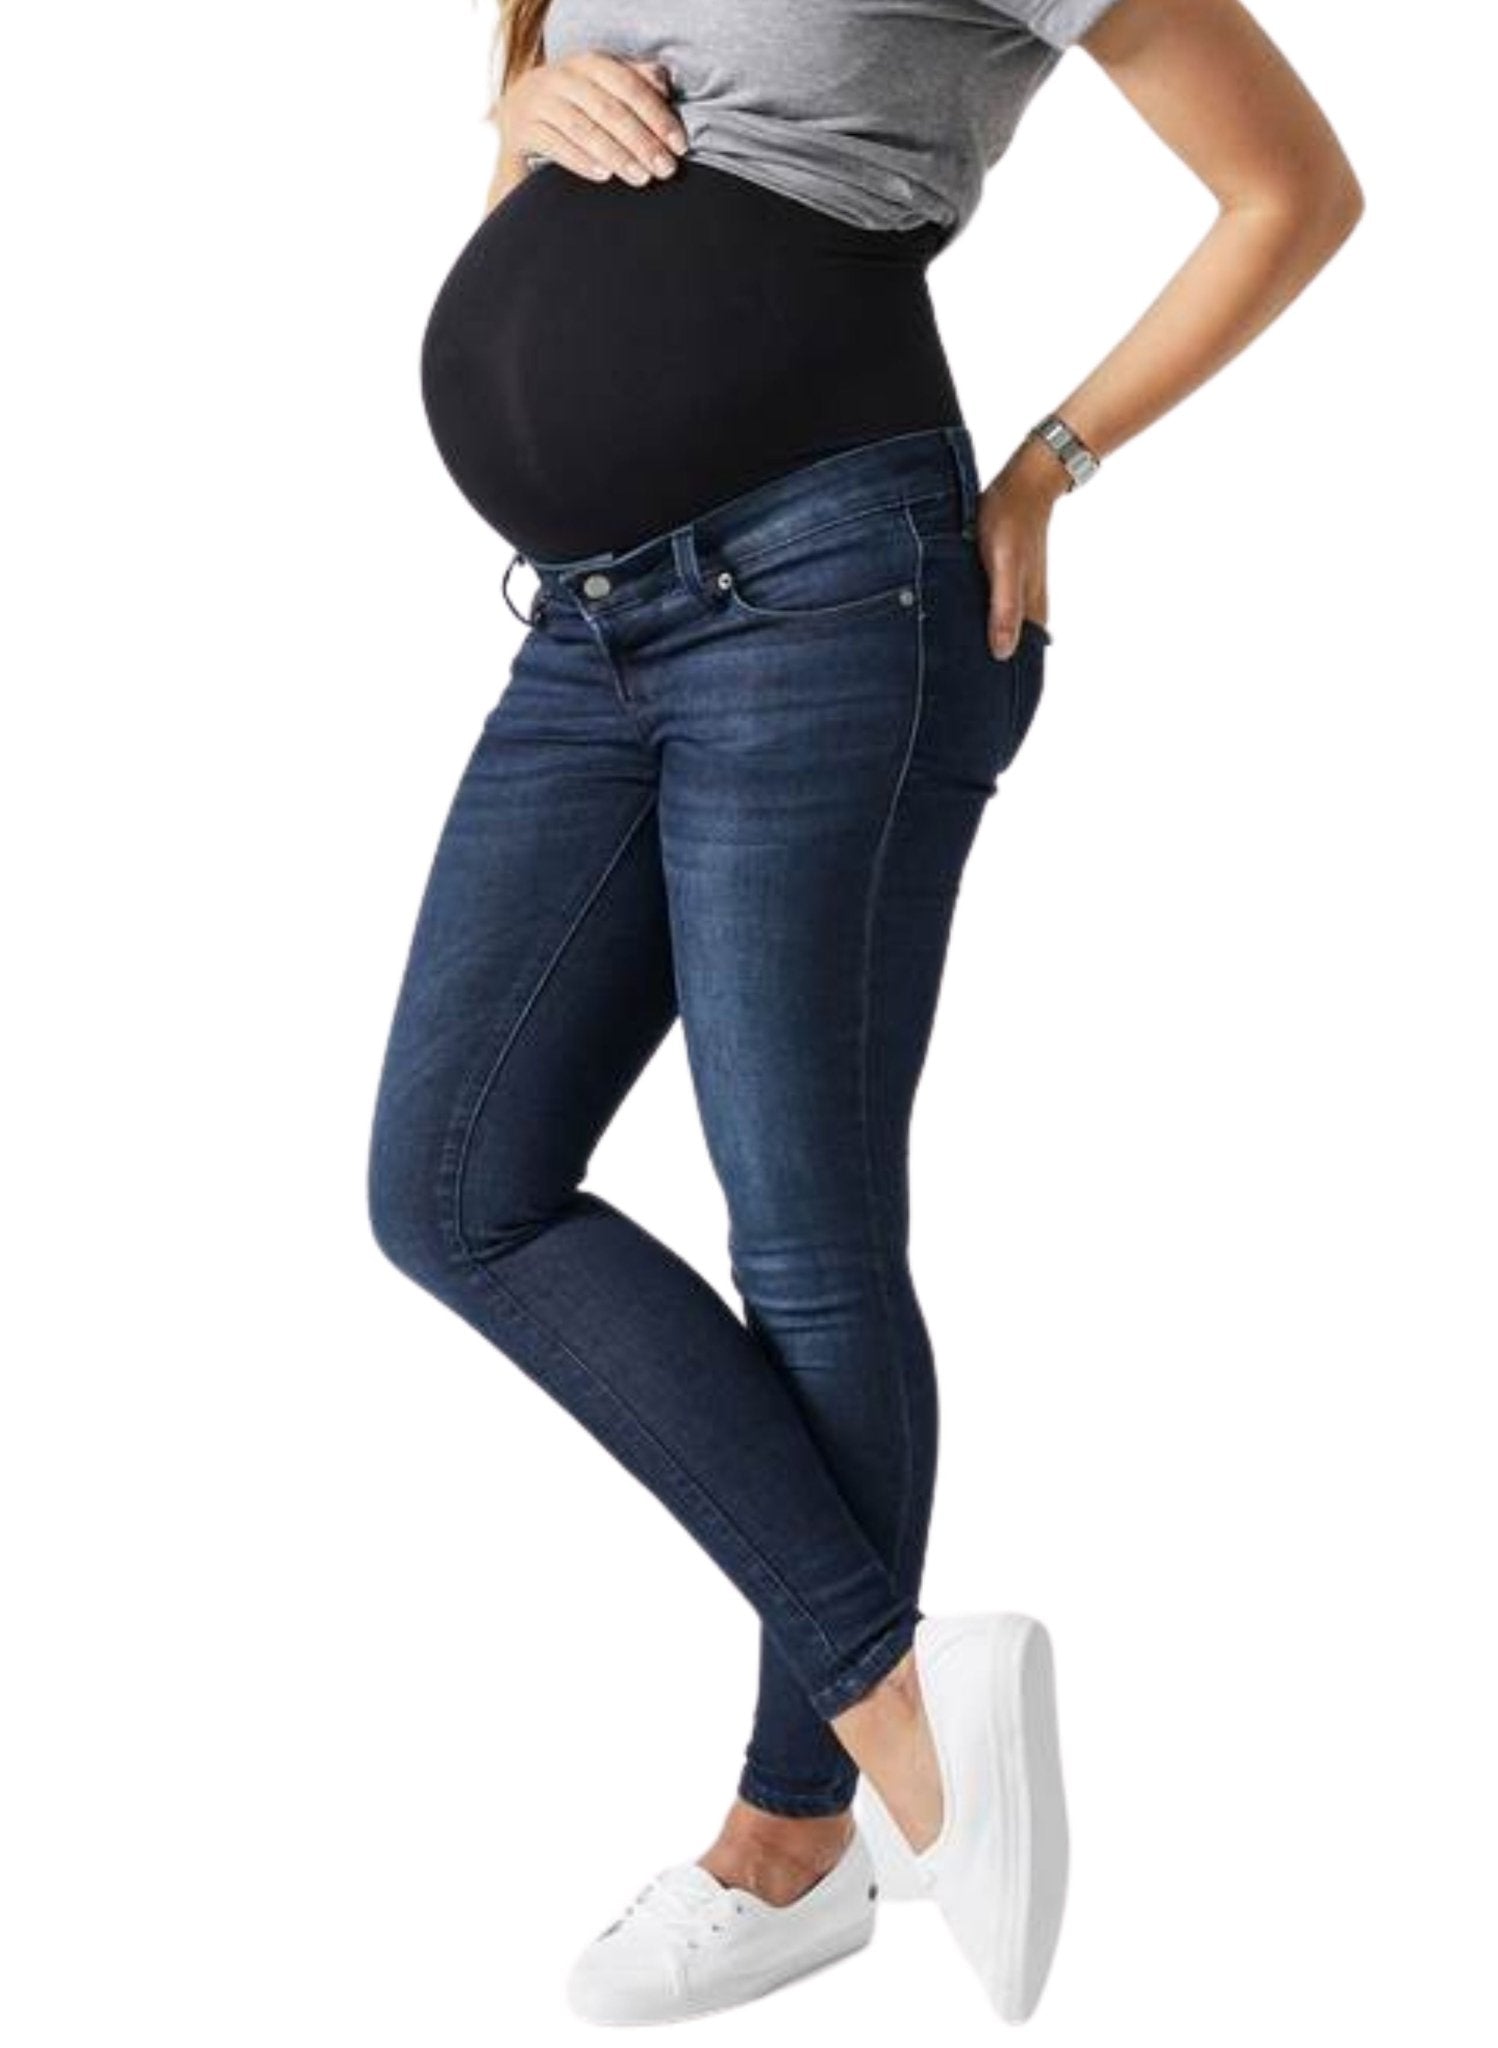 BLANQI Maternity Belly Support Skinny Jeans - Smoke Wash - Mums and Bumps